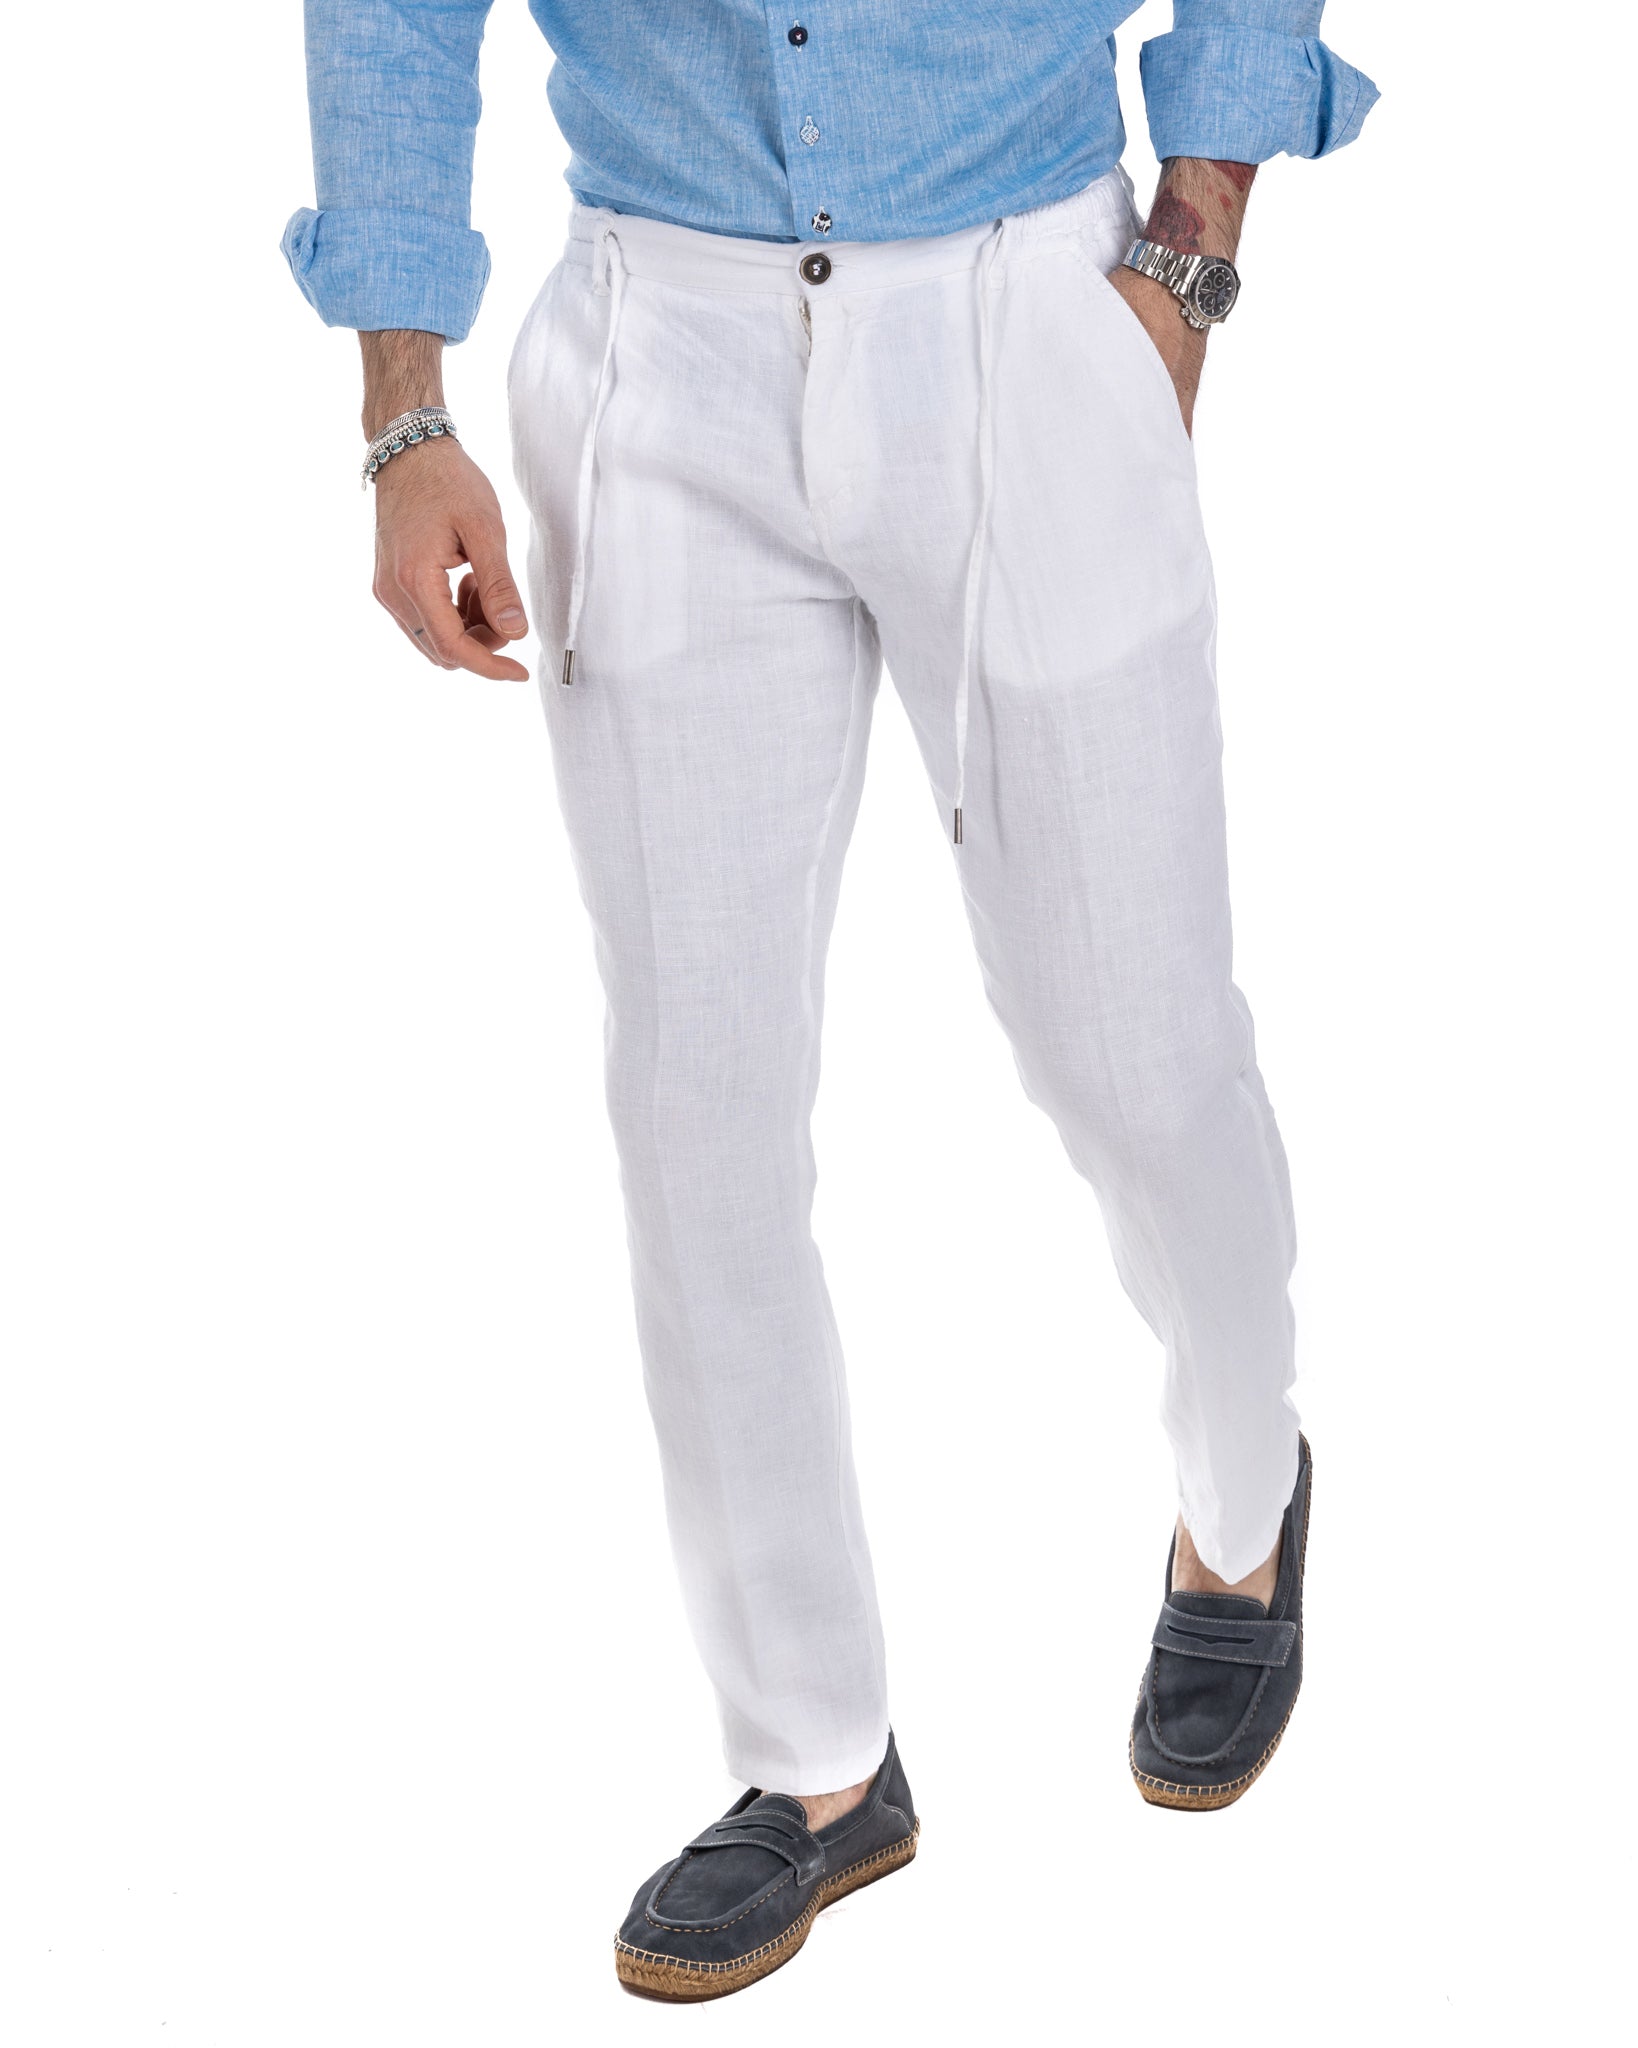 Gustave - trousers in pure white linen